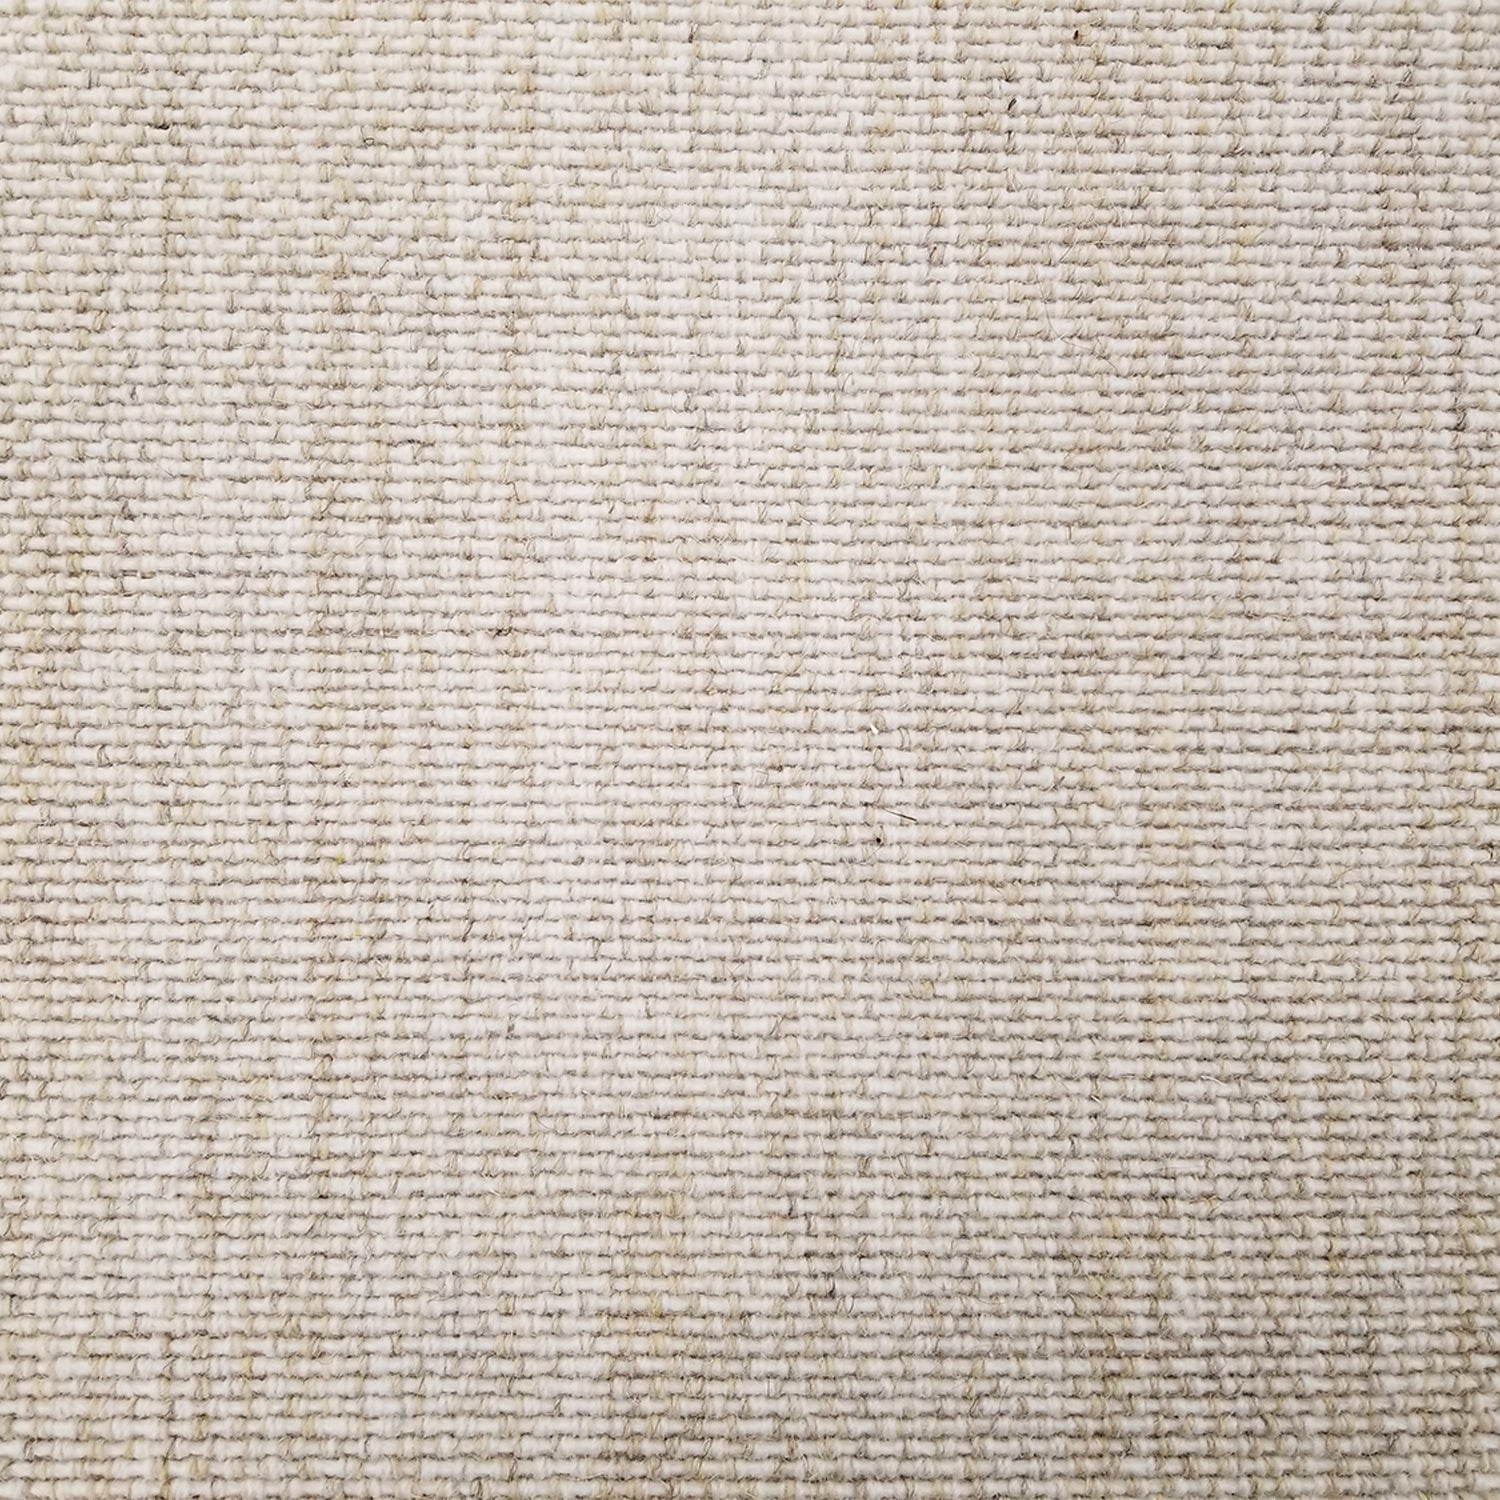 Wool broadloom carpet swatch in a checked woven pattern in cream, tan and brown.